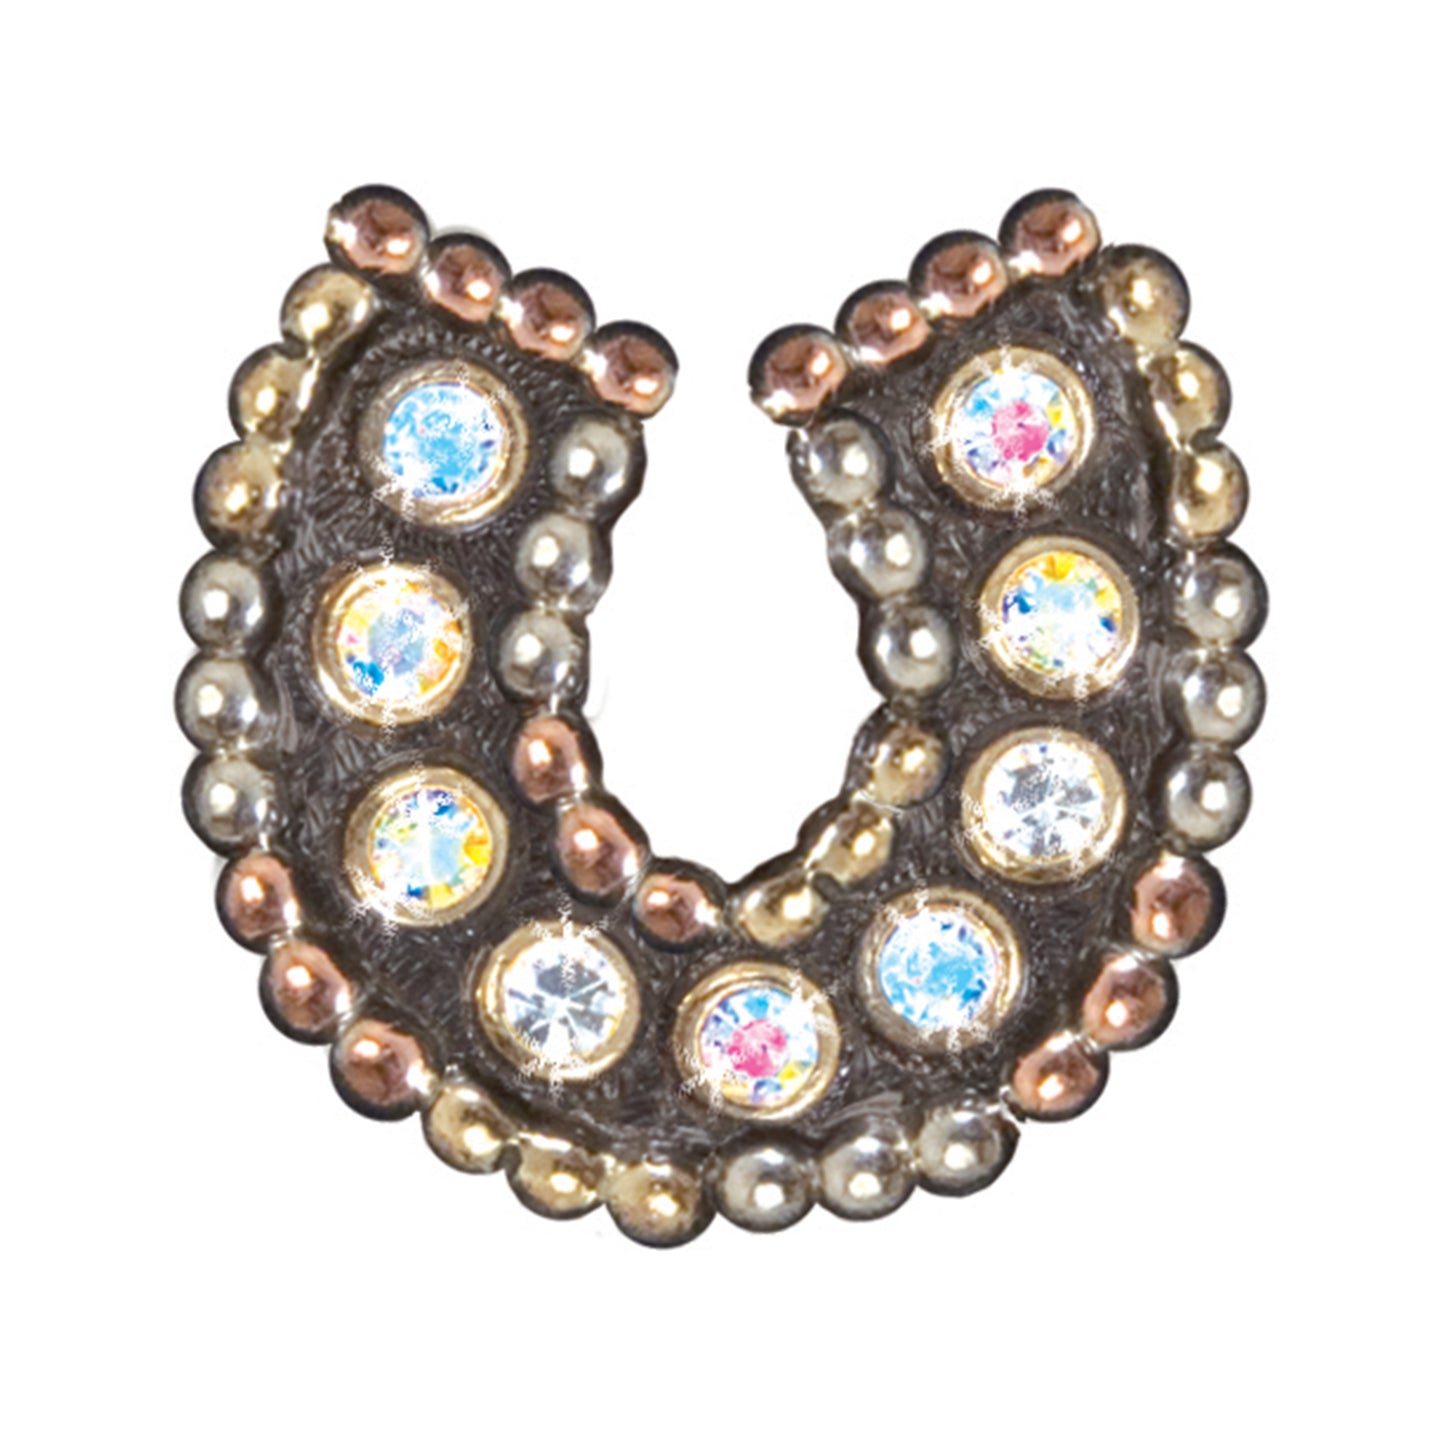 1-1/4" 3X Horseshoe concho with frost background, prism crystals, and tri color studs around edge (set of 4). 